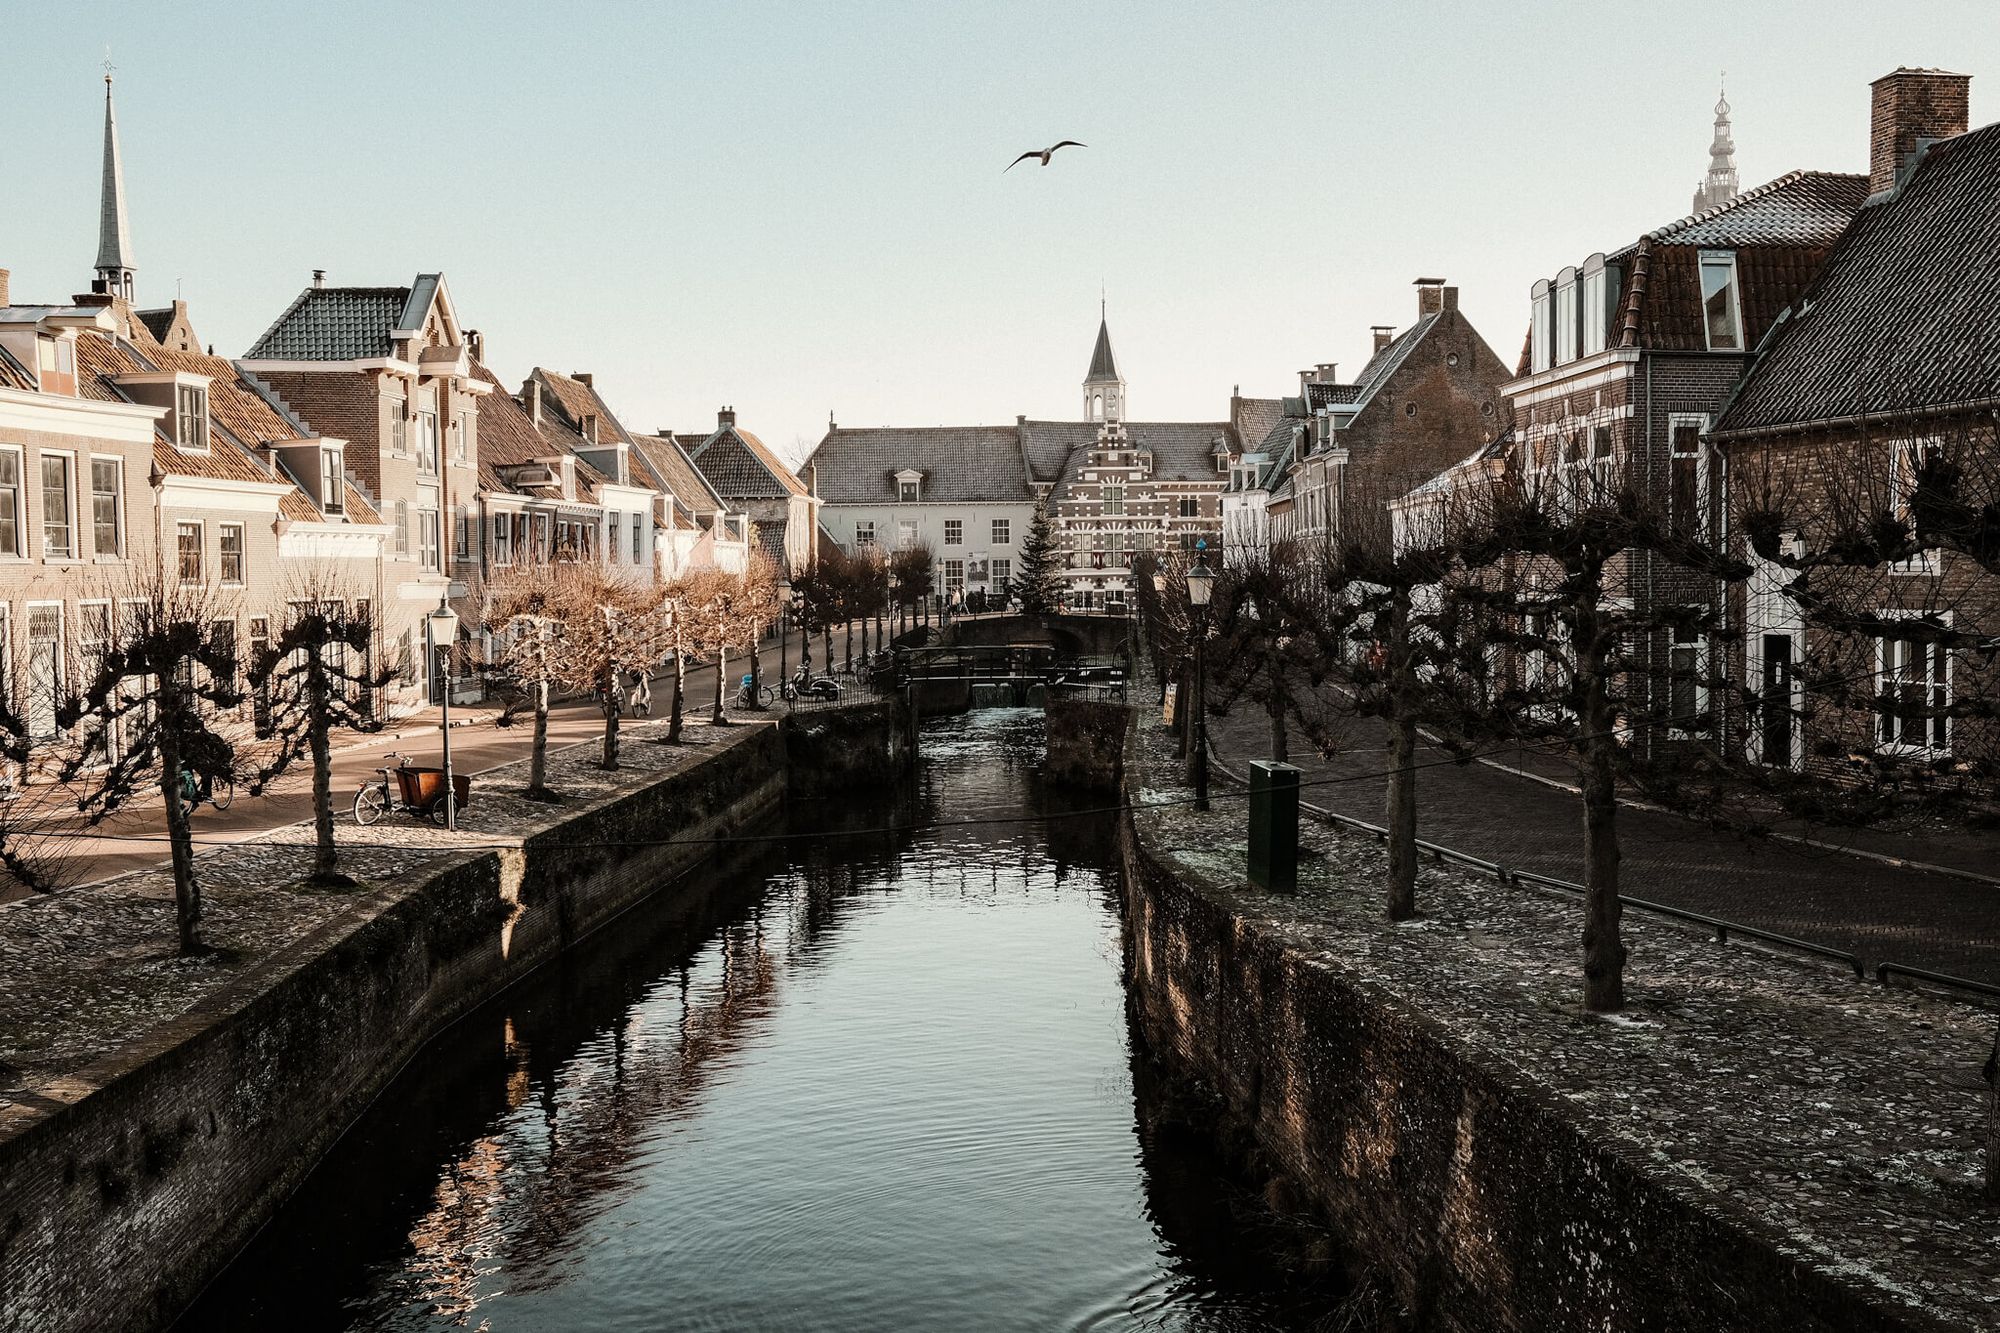 A bird flying over the old canals of Amersfoort